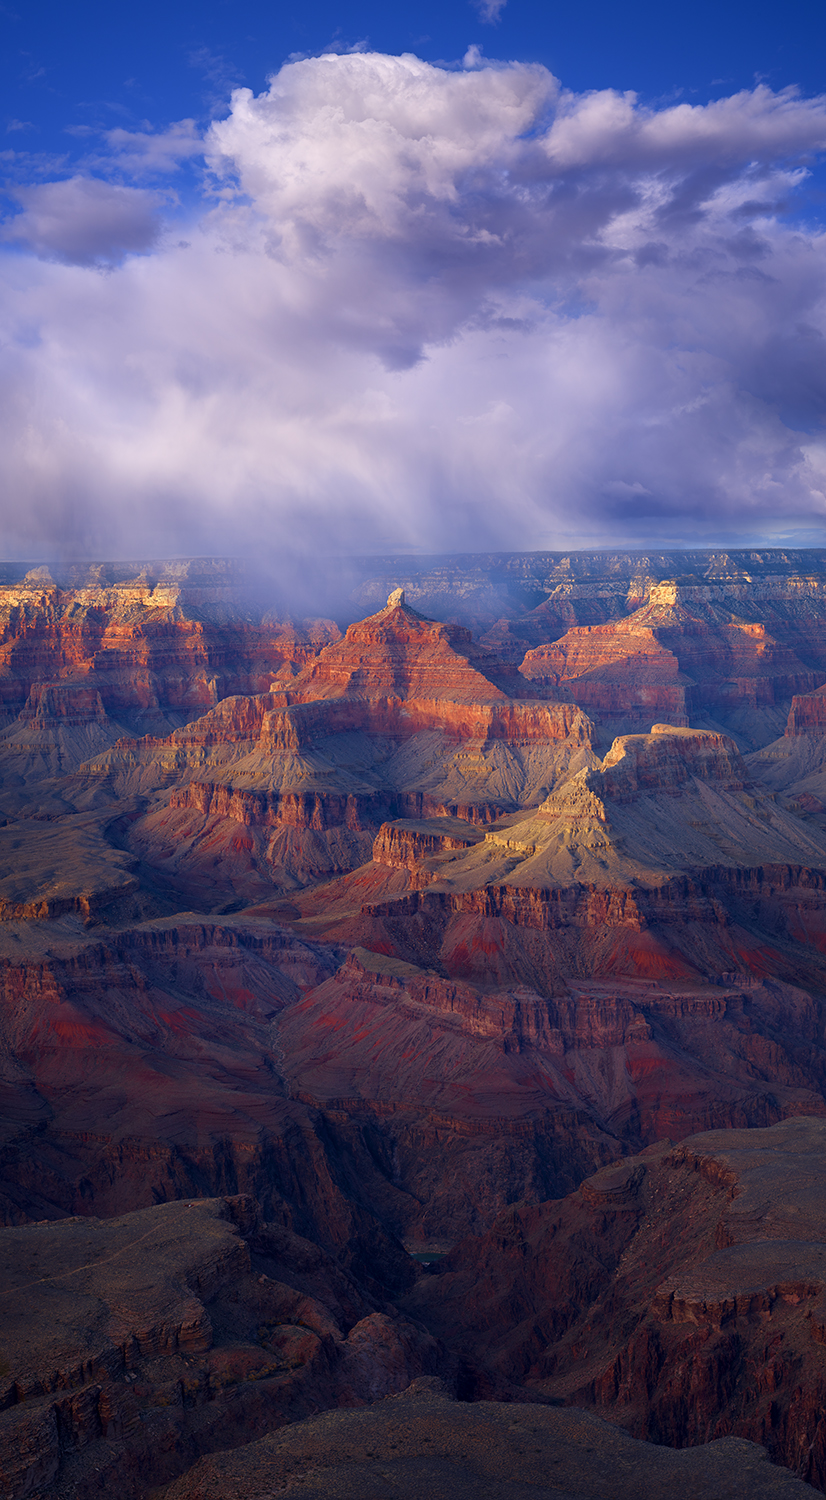 A fine art photograph of the Grand Canyon during a rain storm.